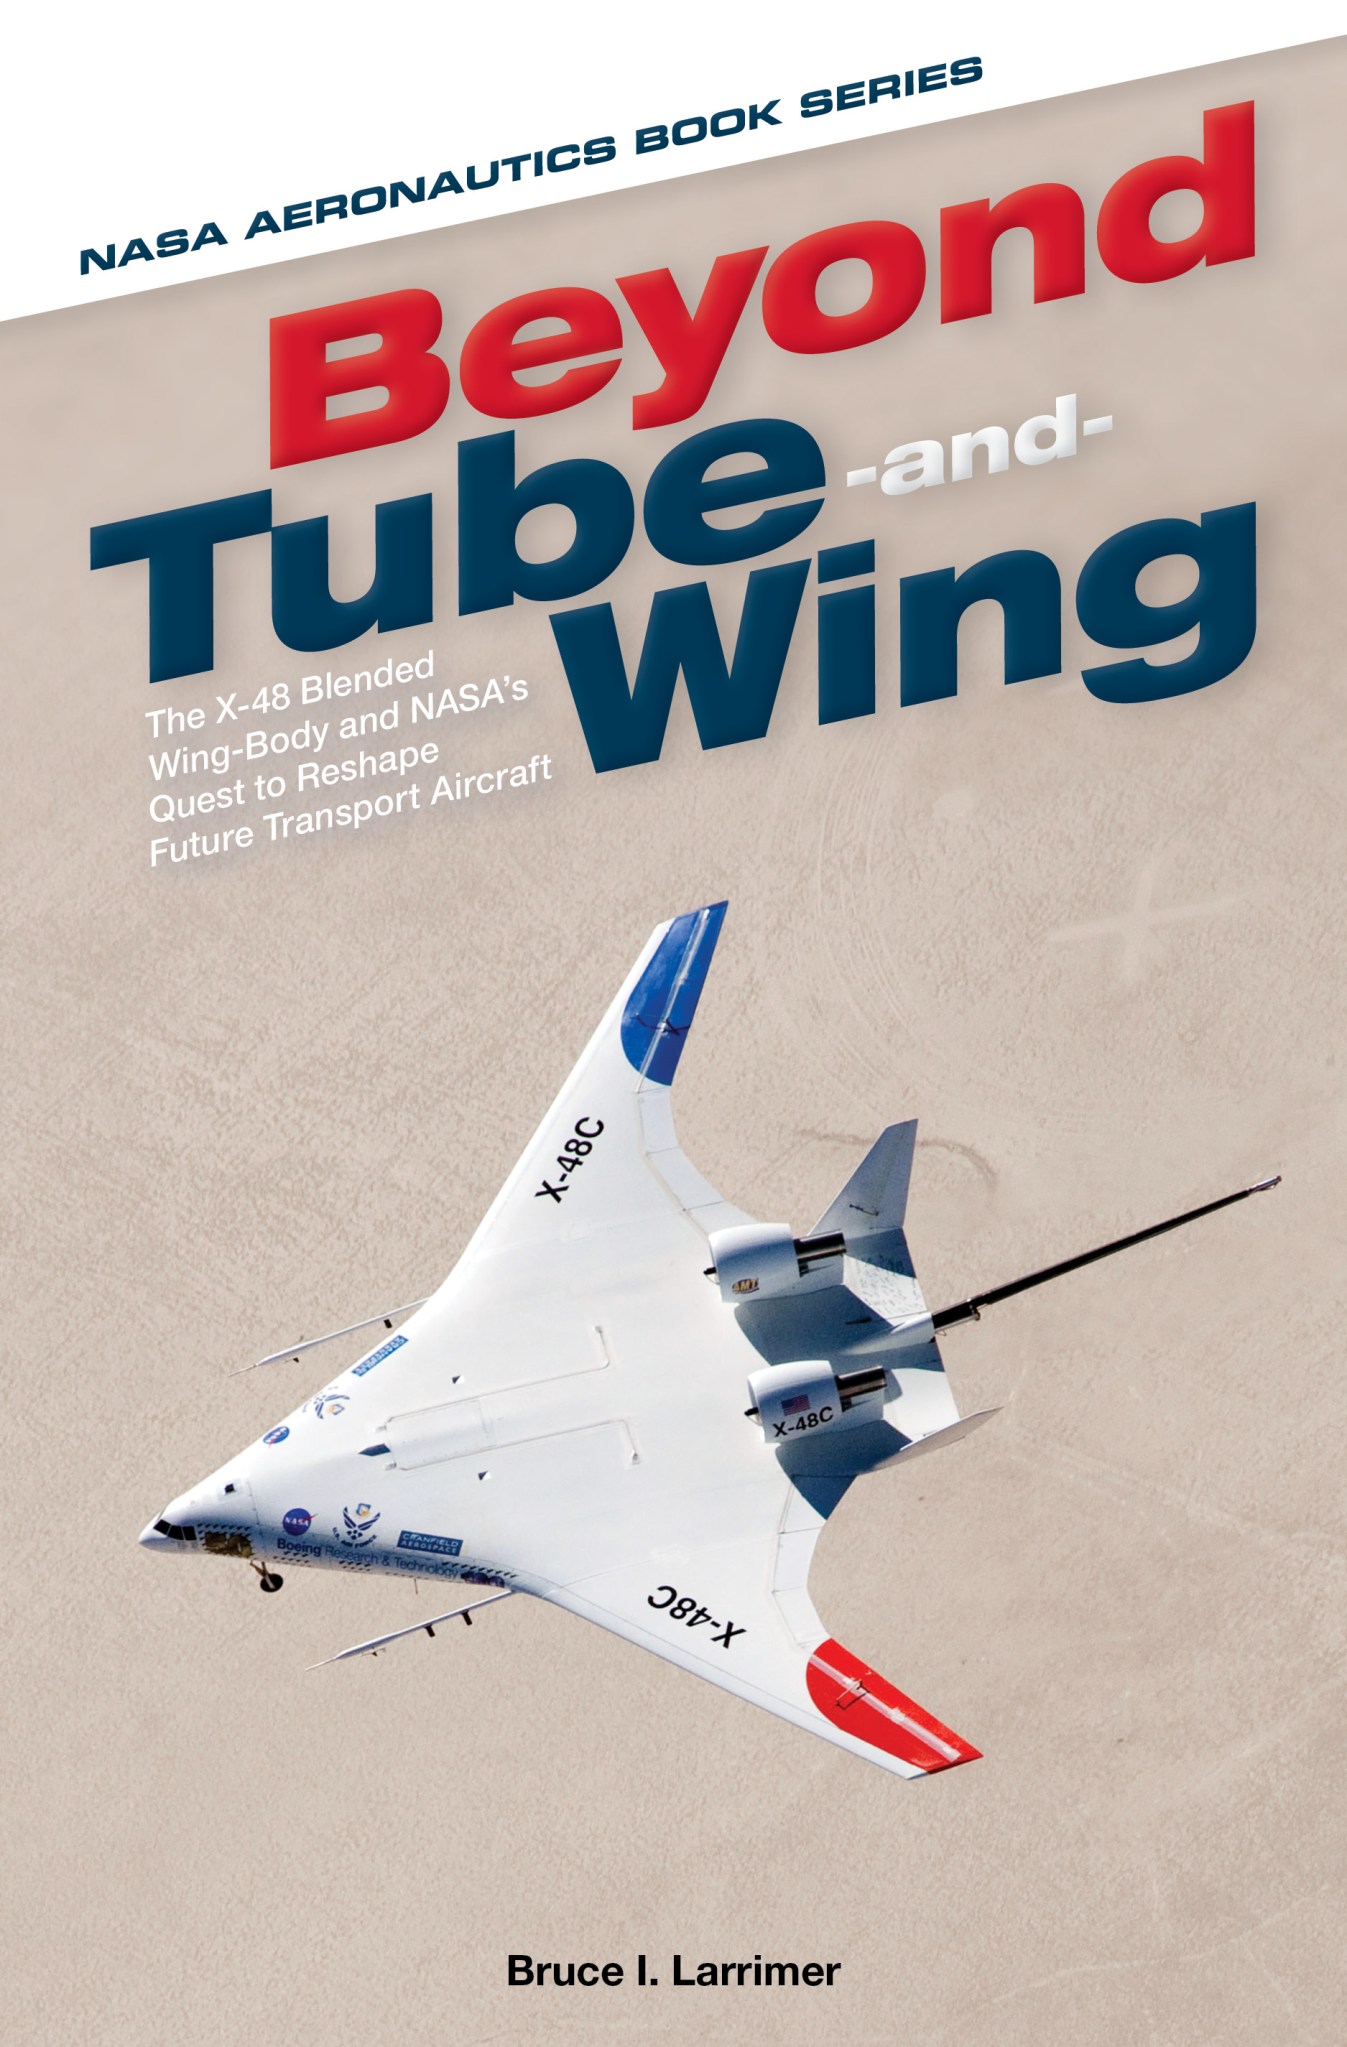 Beyond Tube-and-Wing: The X-48 Blended Wing-Body and NASA's Quest to Reshape Future Transport Aircraft